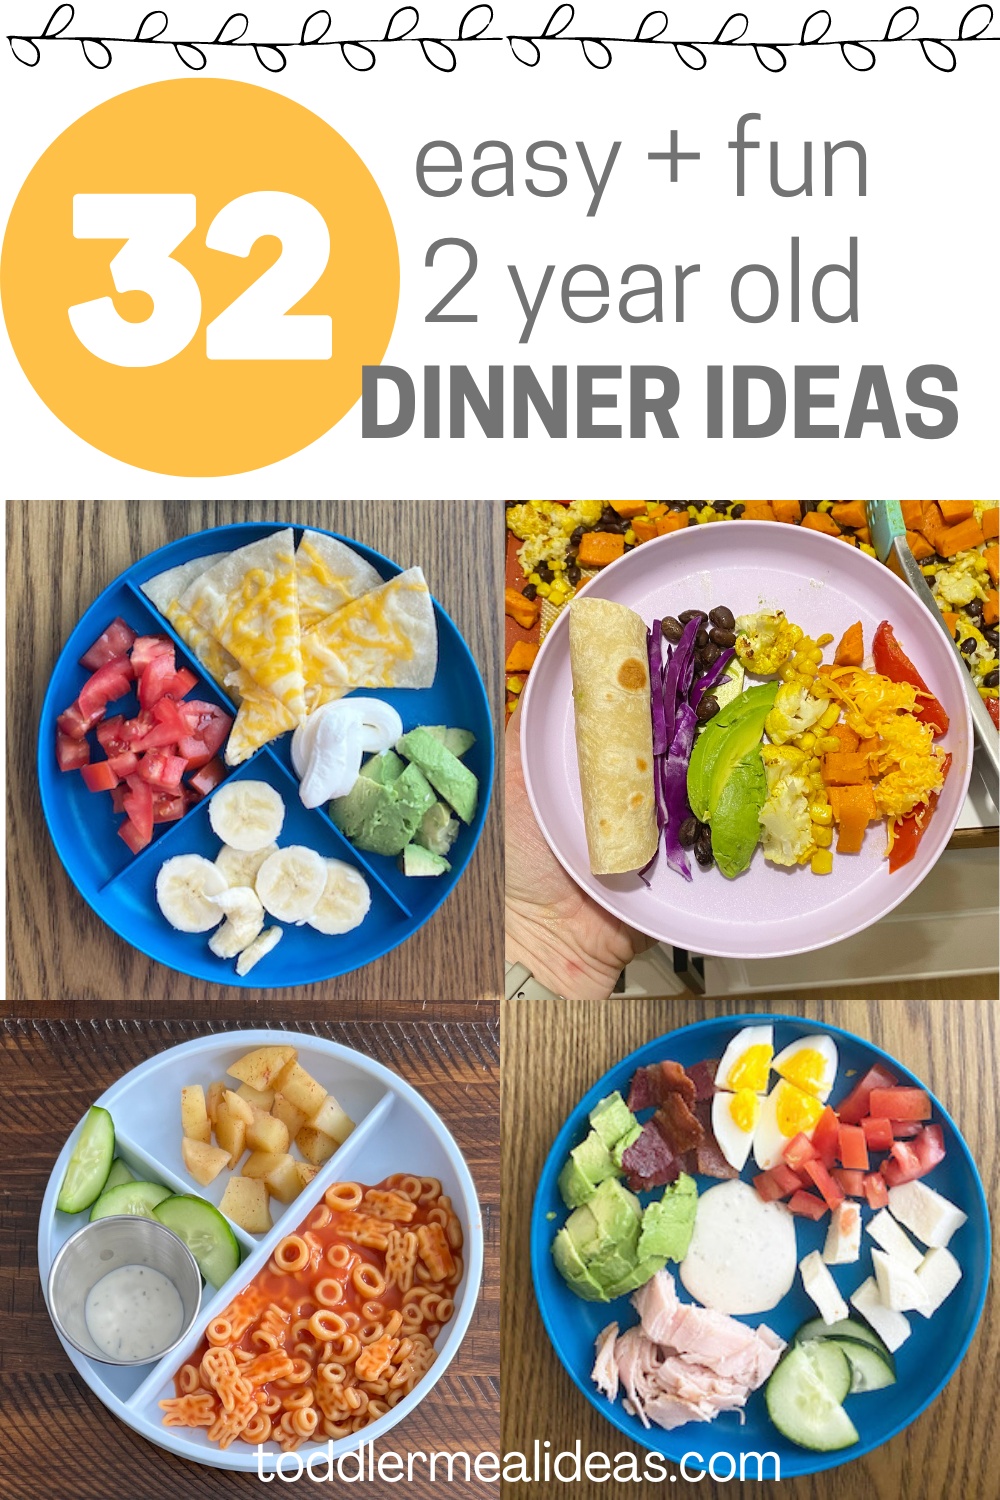 32 Dinner Ideas for 2 Year Olds - Toddler Meal Ideas